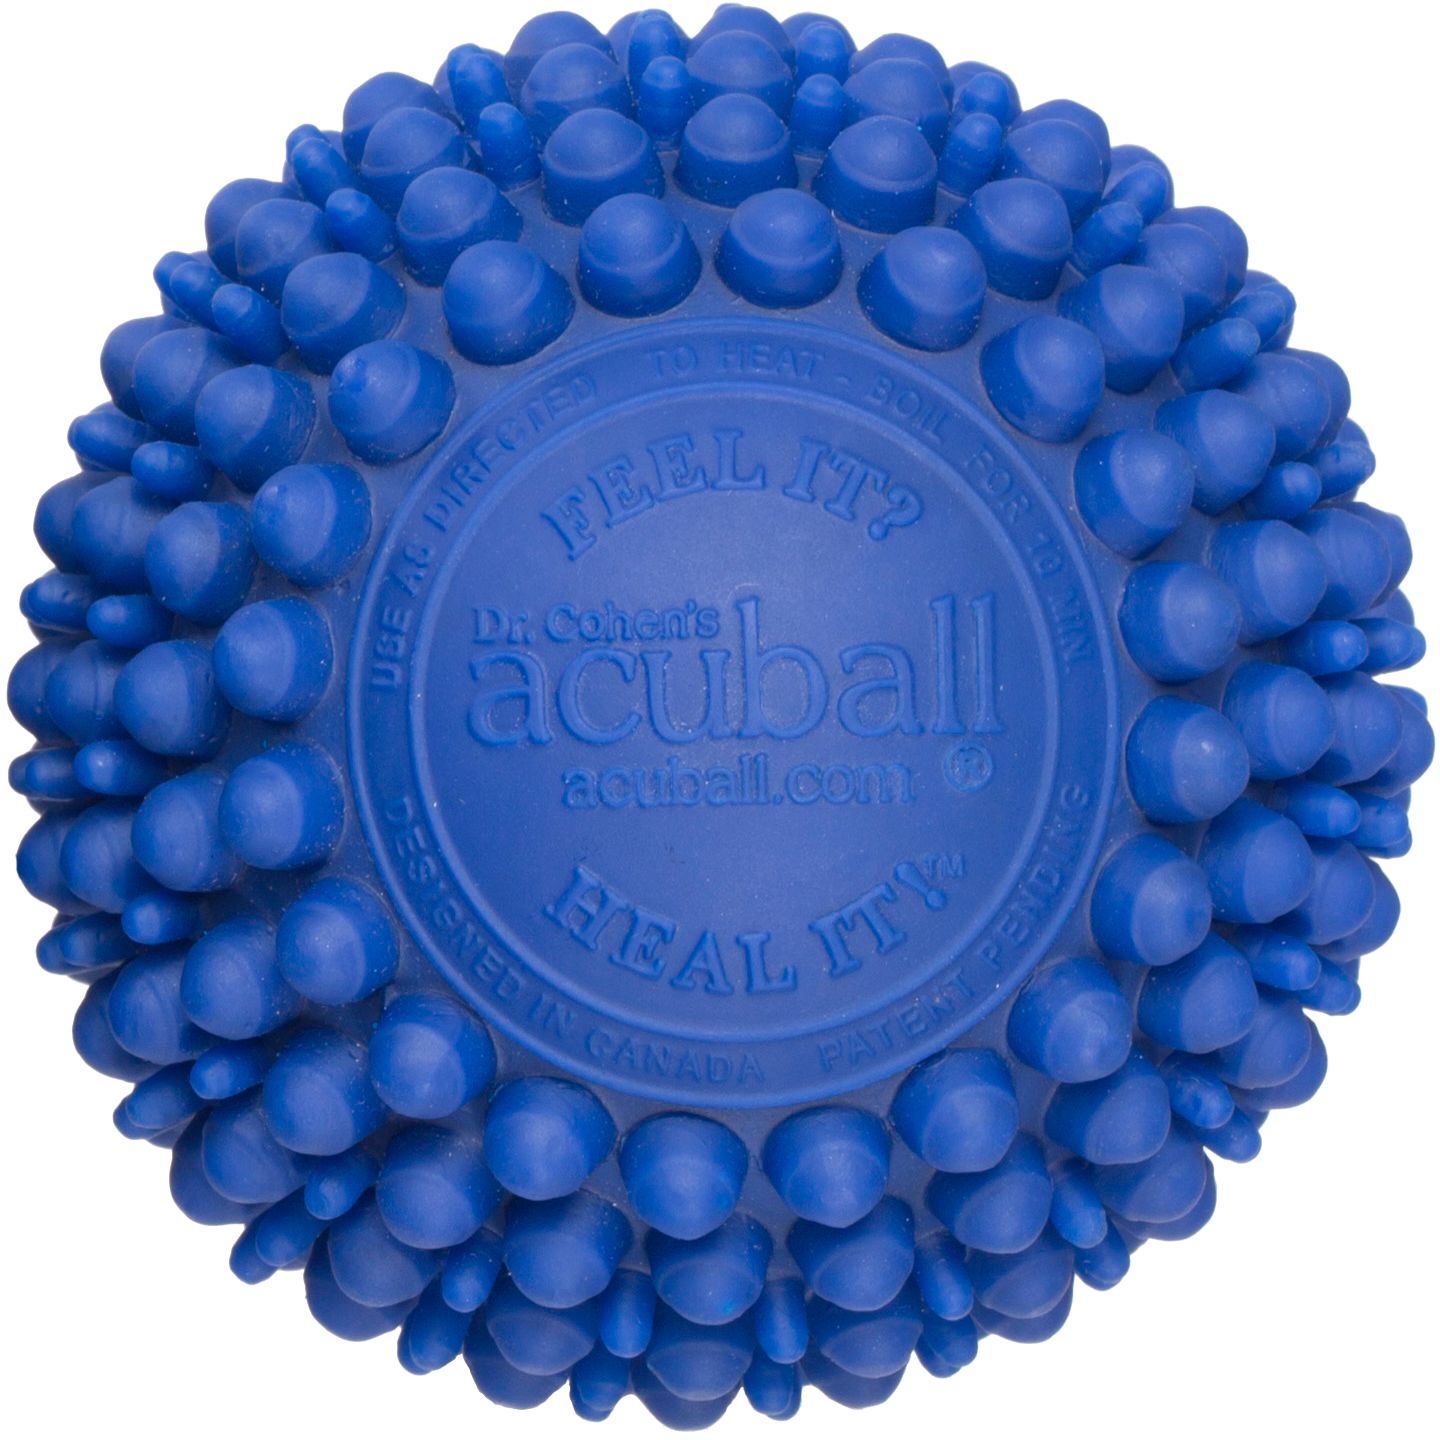 Image of Dr. Cohen's Acuball - Large